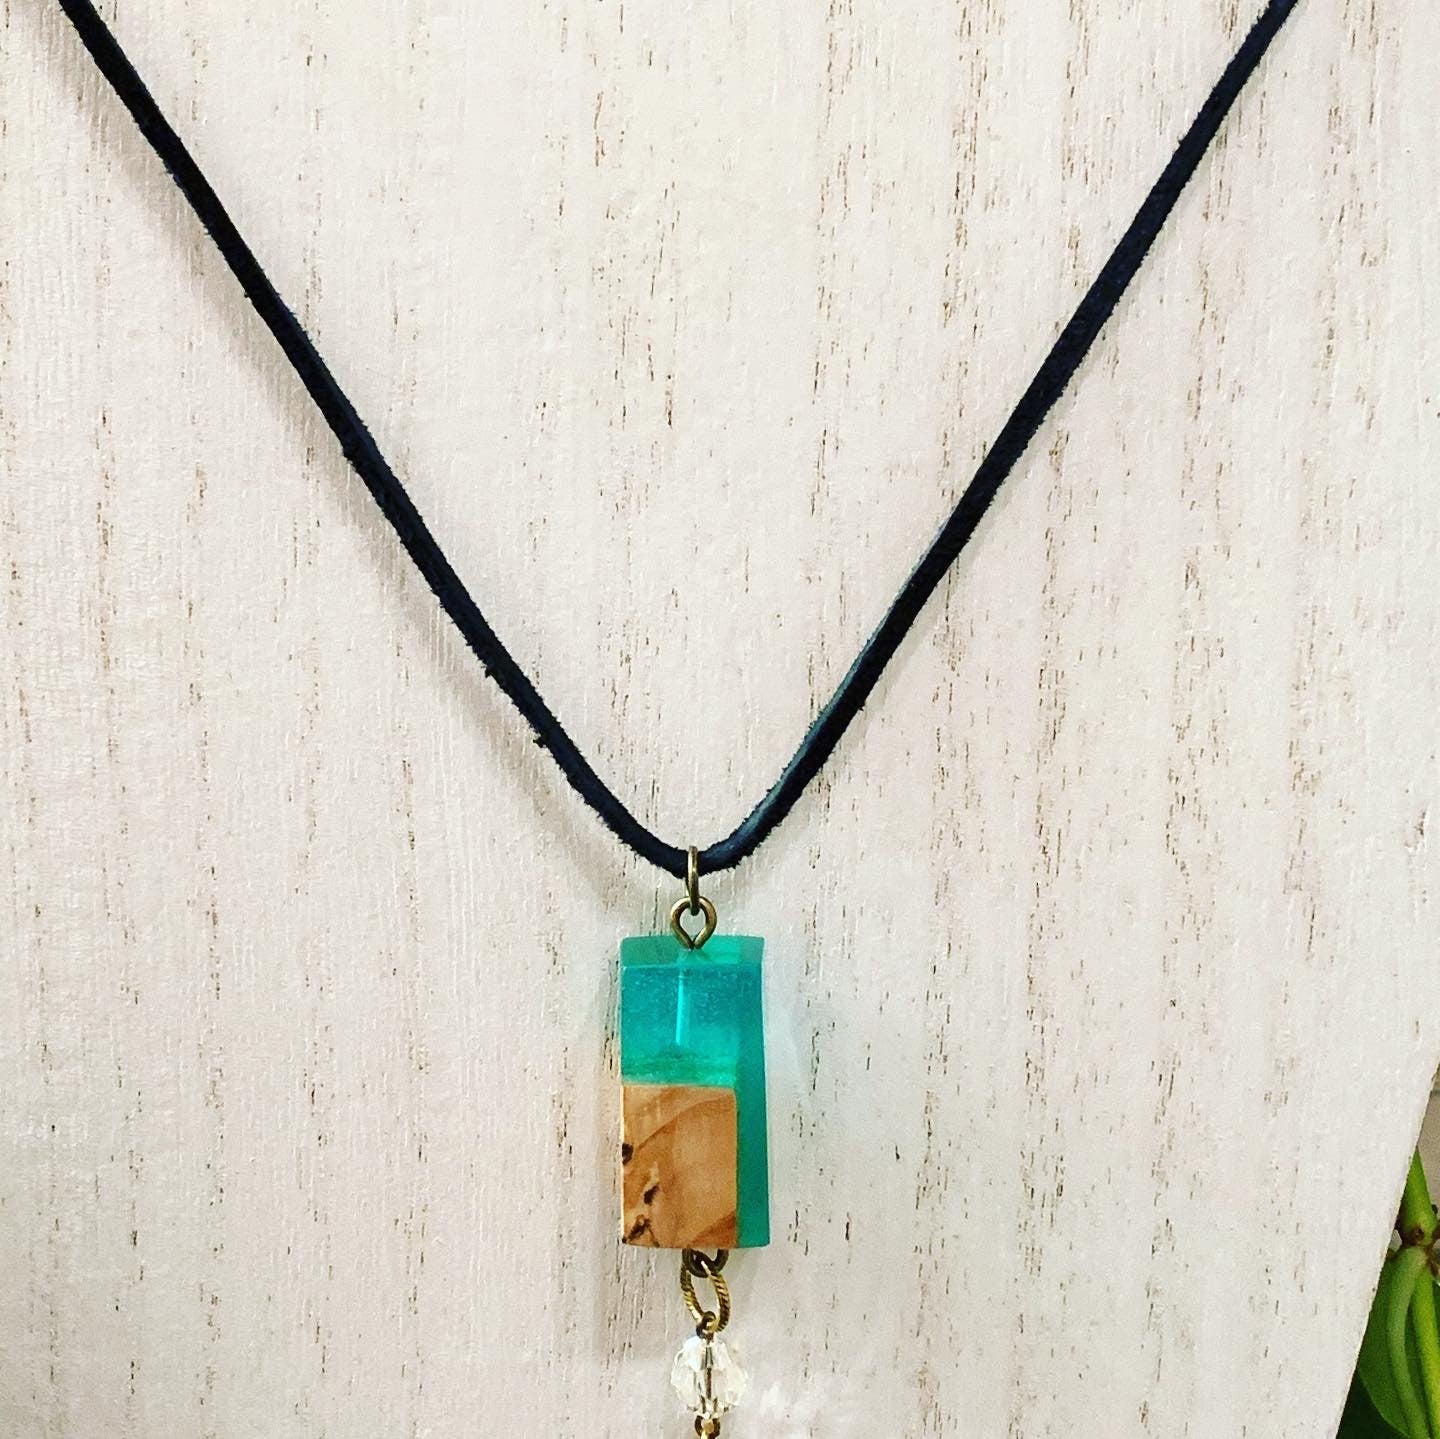 Green  Resin and Wood pendant necklace with crystal bead & teardrop charm with turquoise colored glass bead